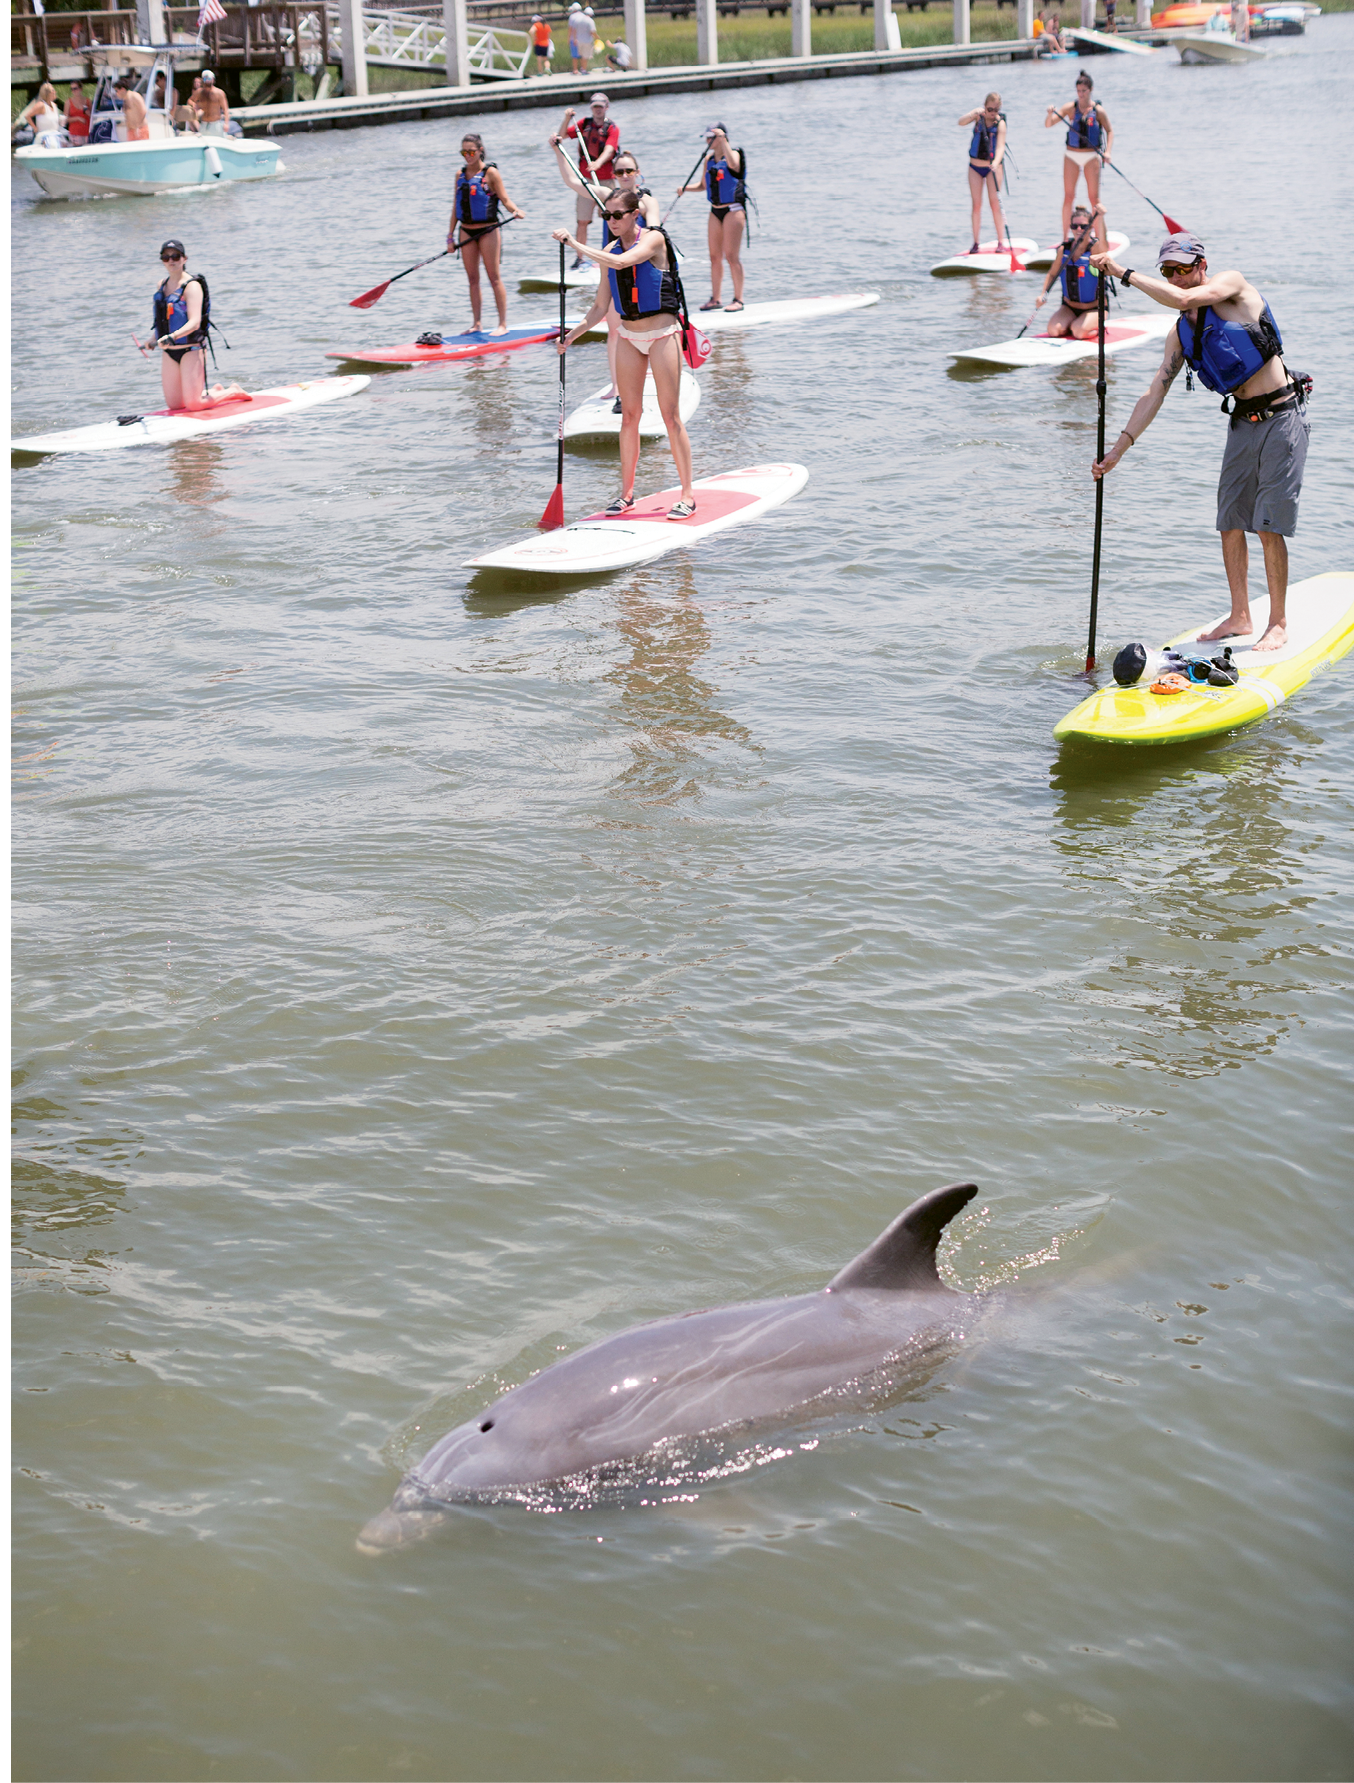 A dolphin joins a group of paddlers.